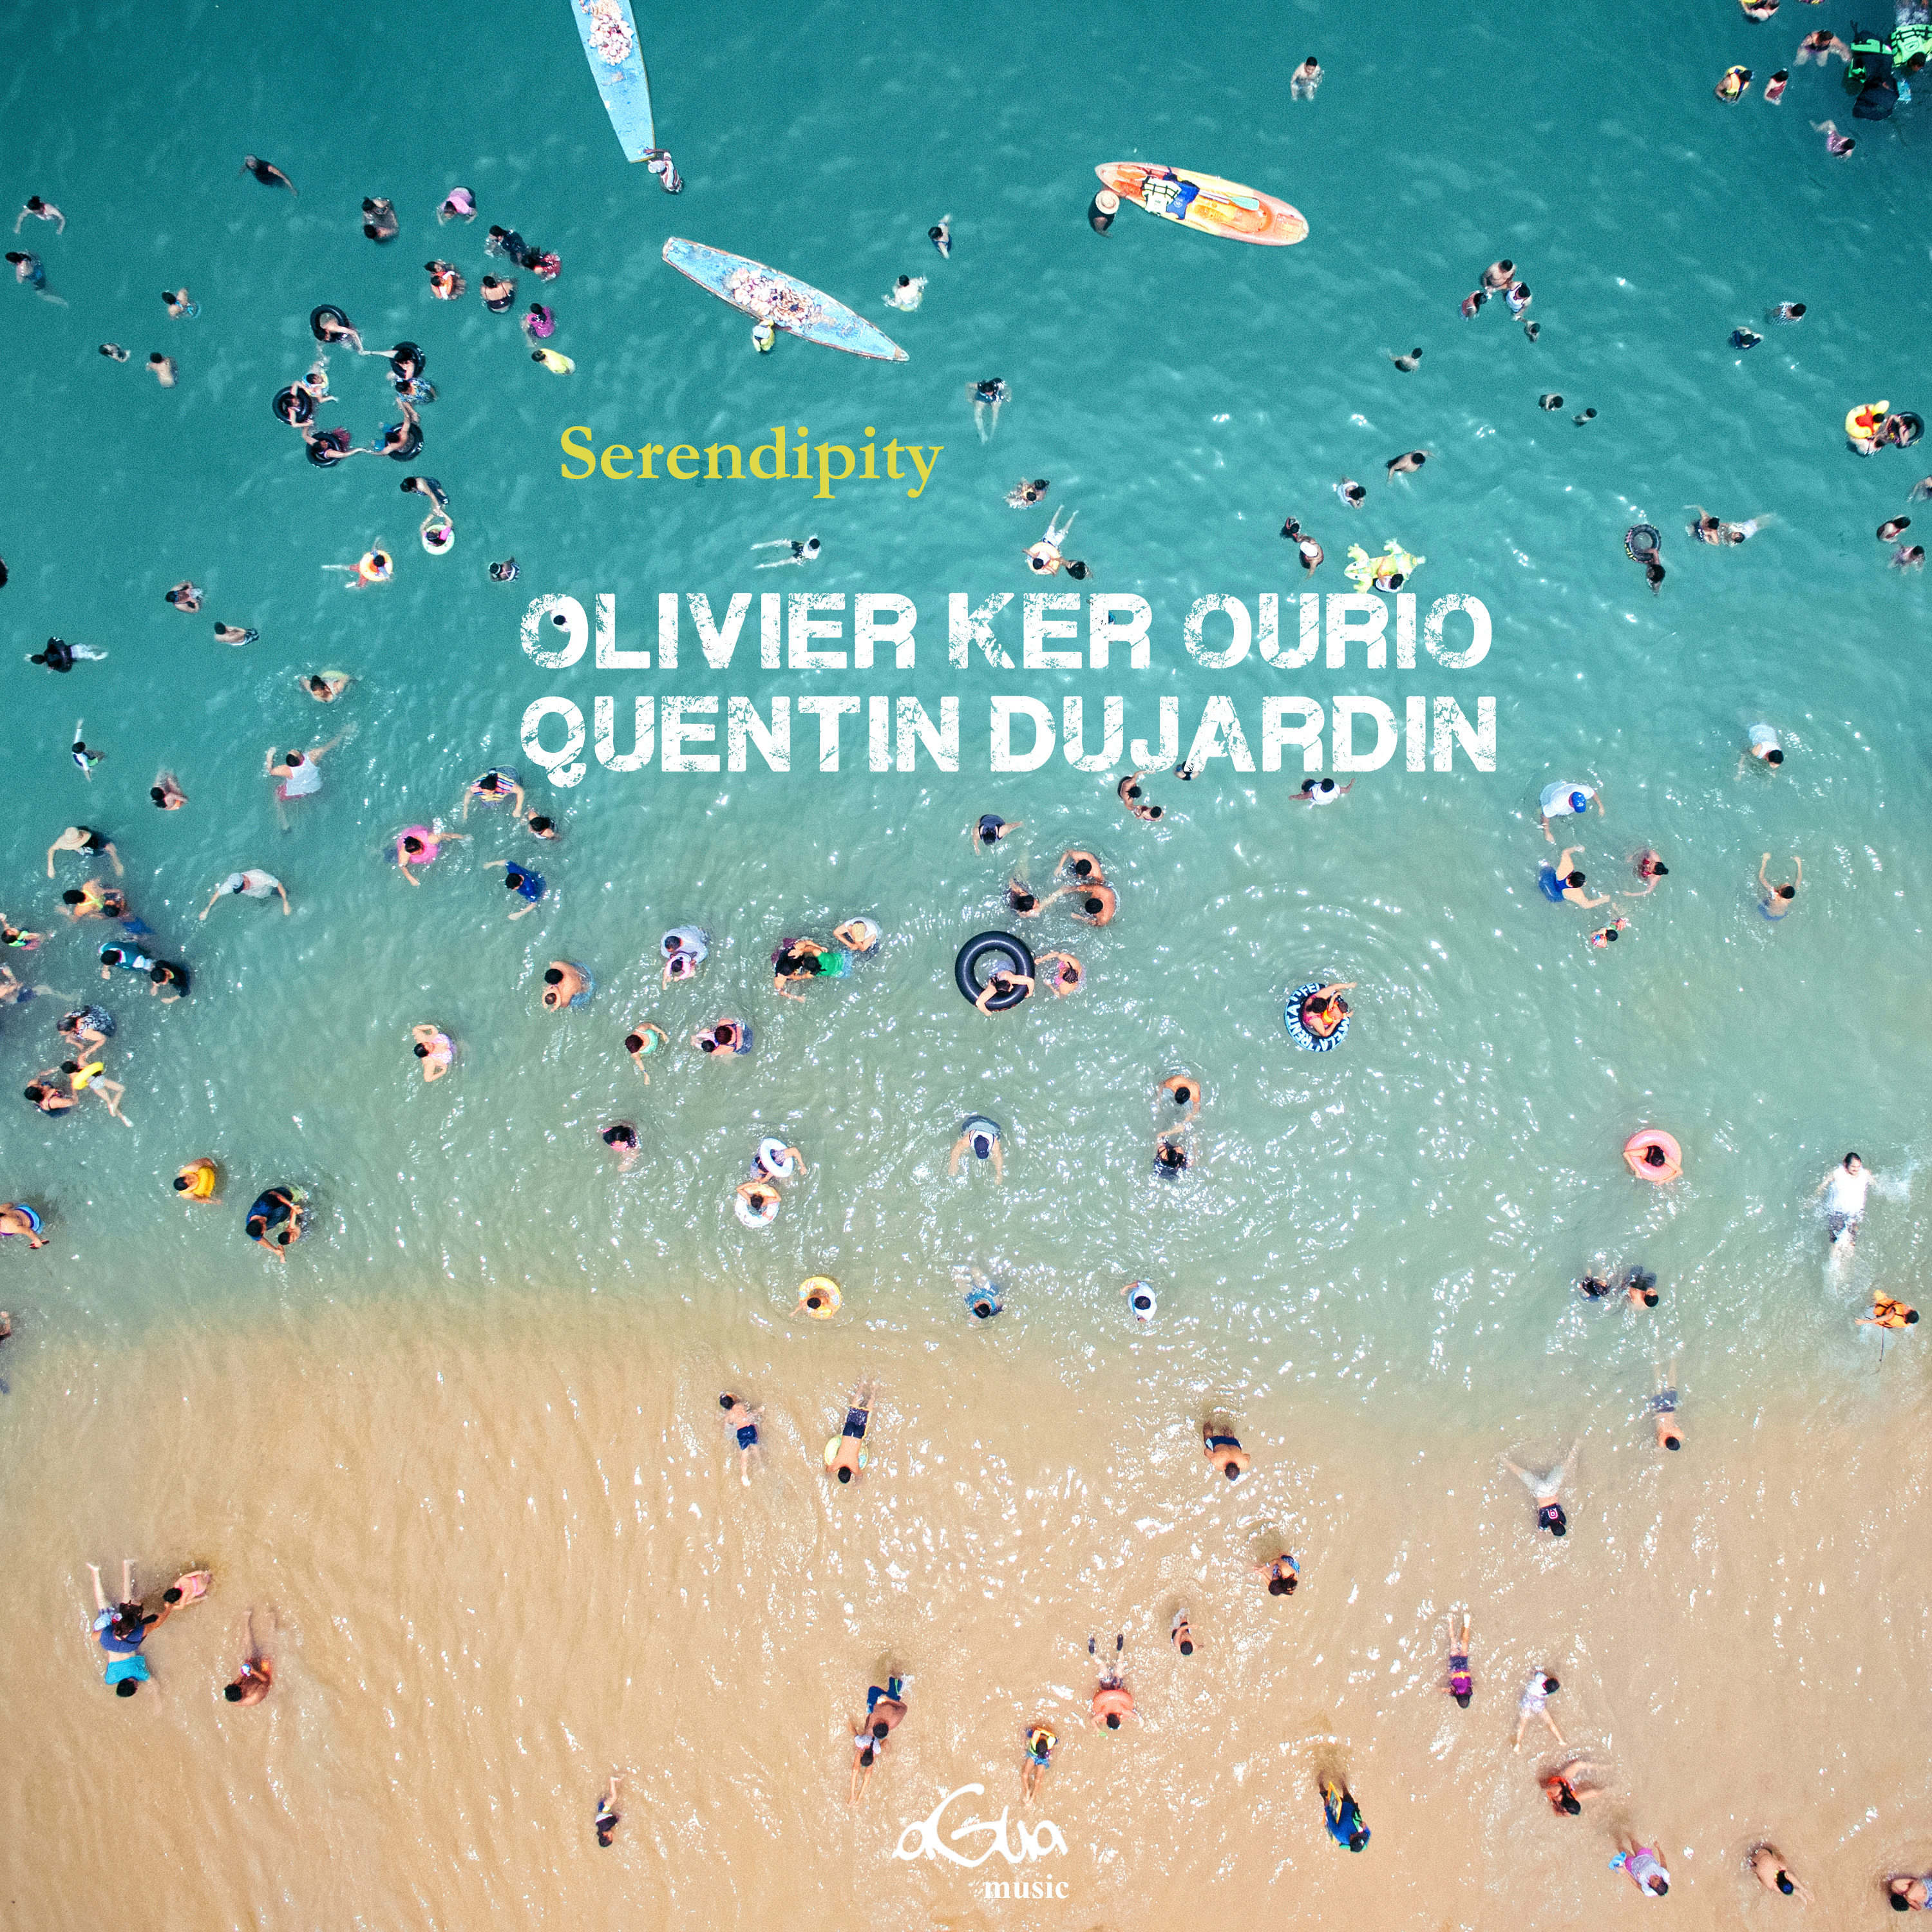 Duo Quentin Dujardin/Olivier Ker Ourio - Serendipity